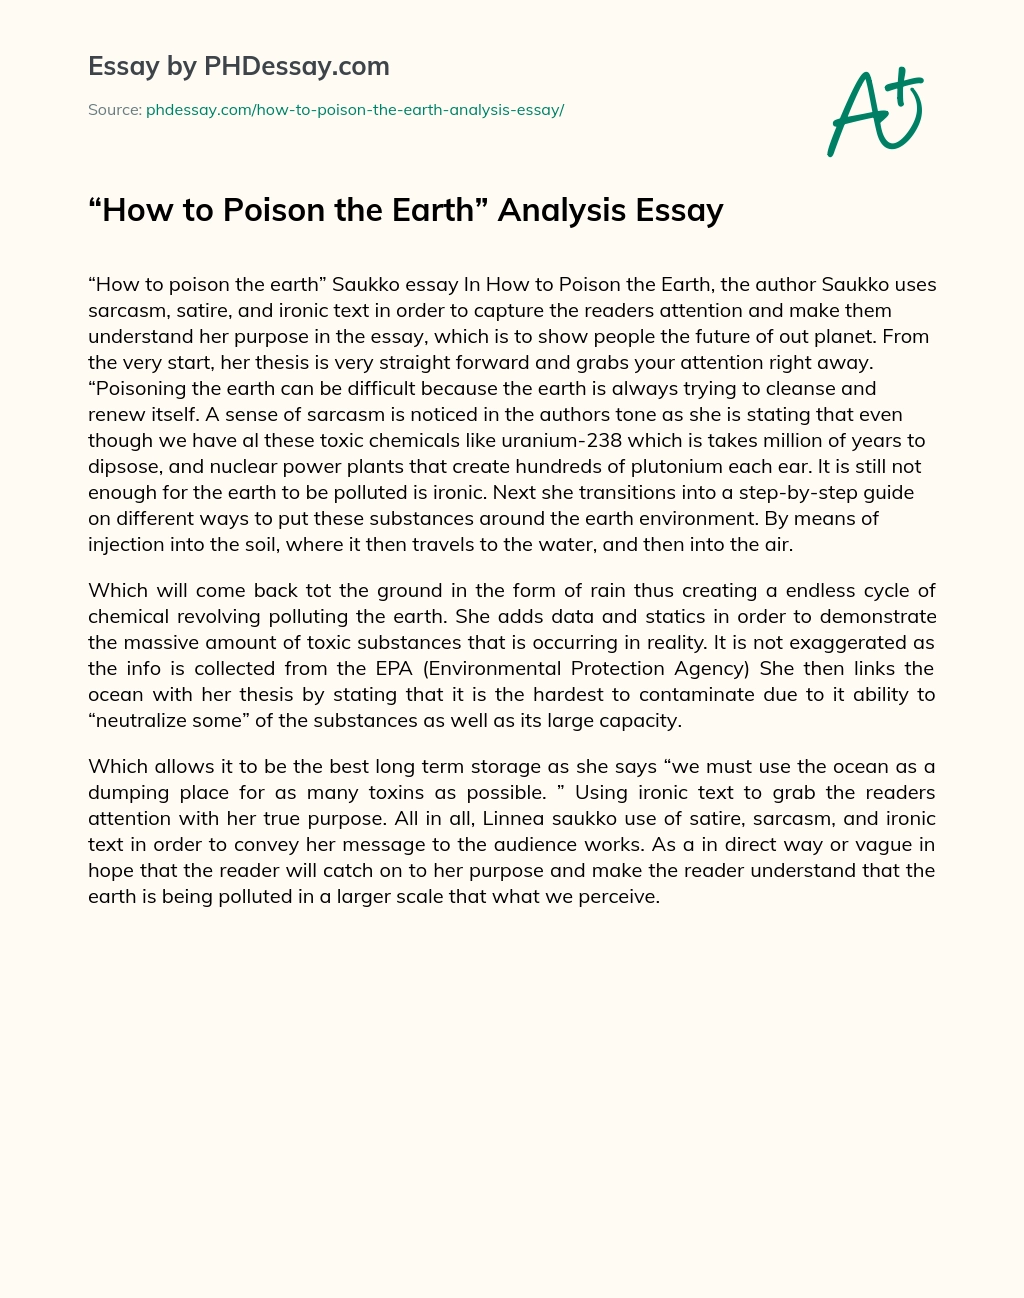 How to Poison the Earth Analysis Essay essay